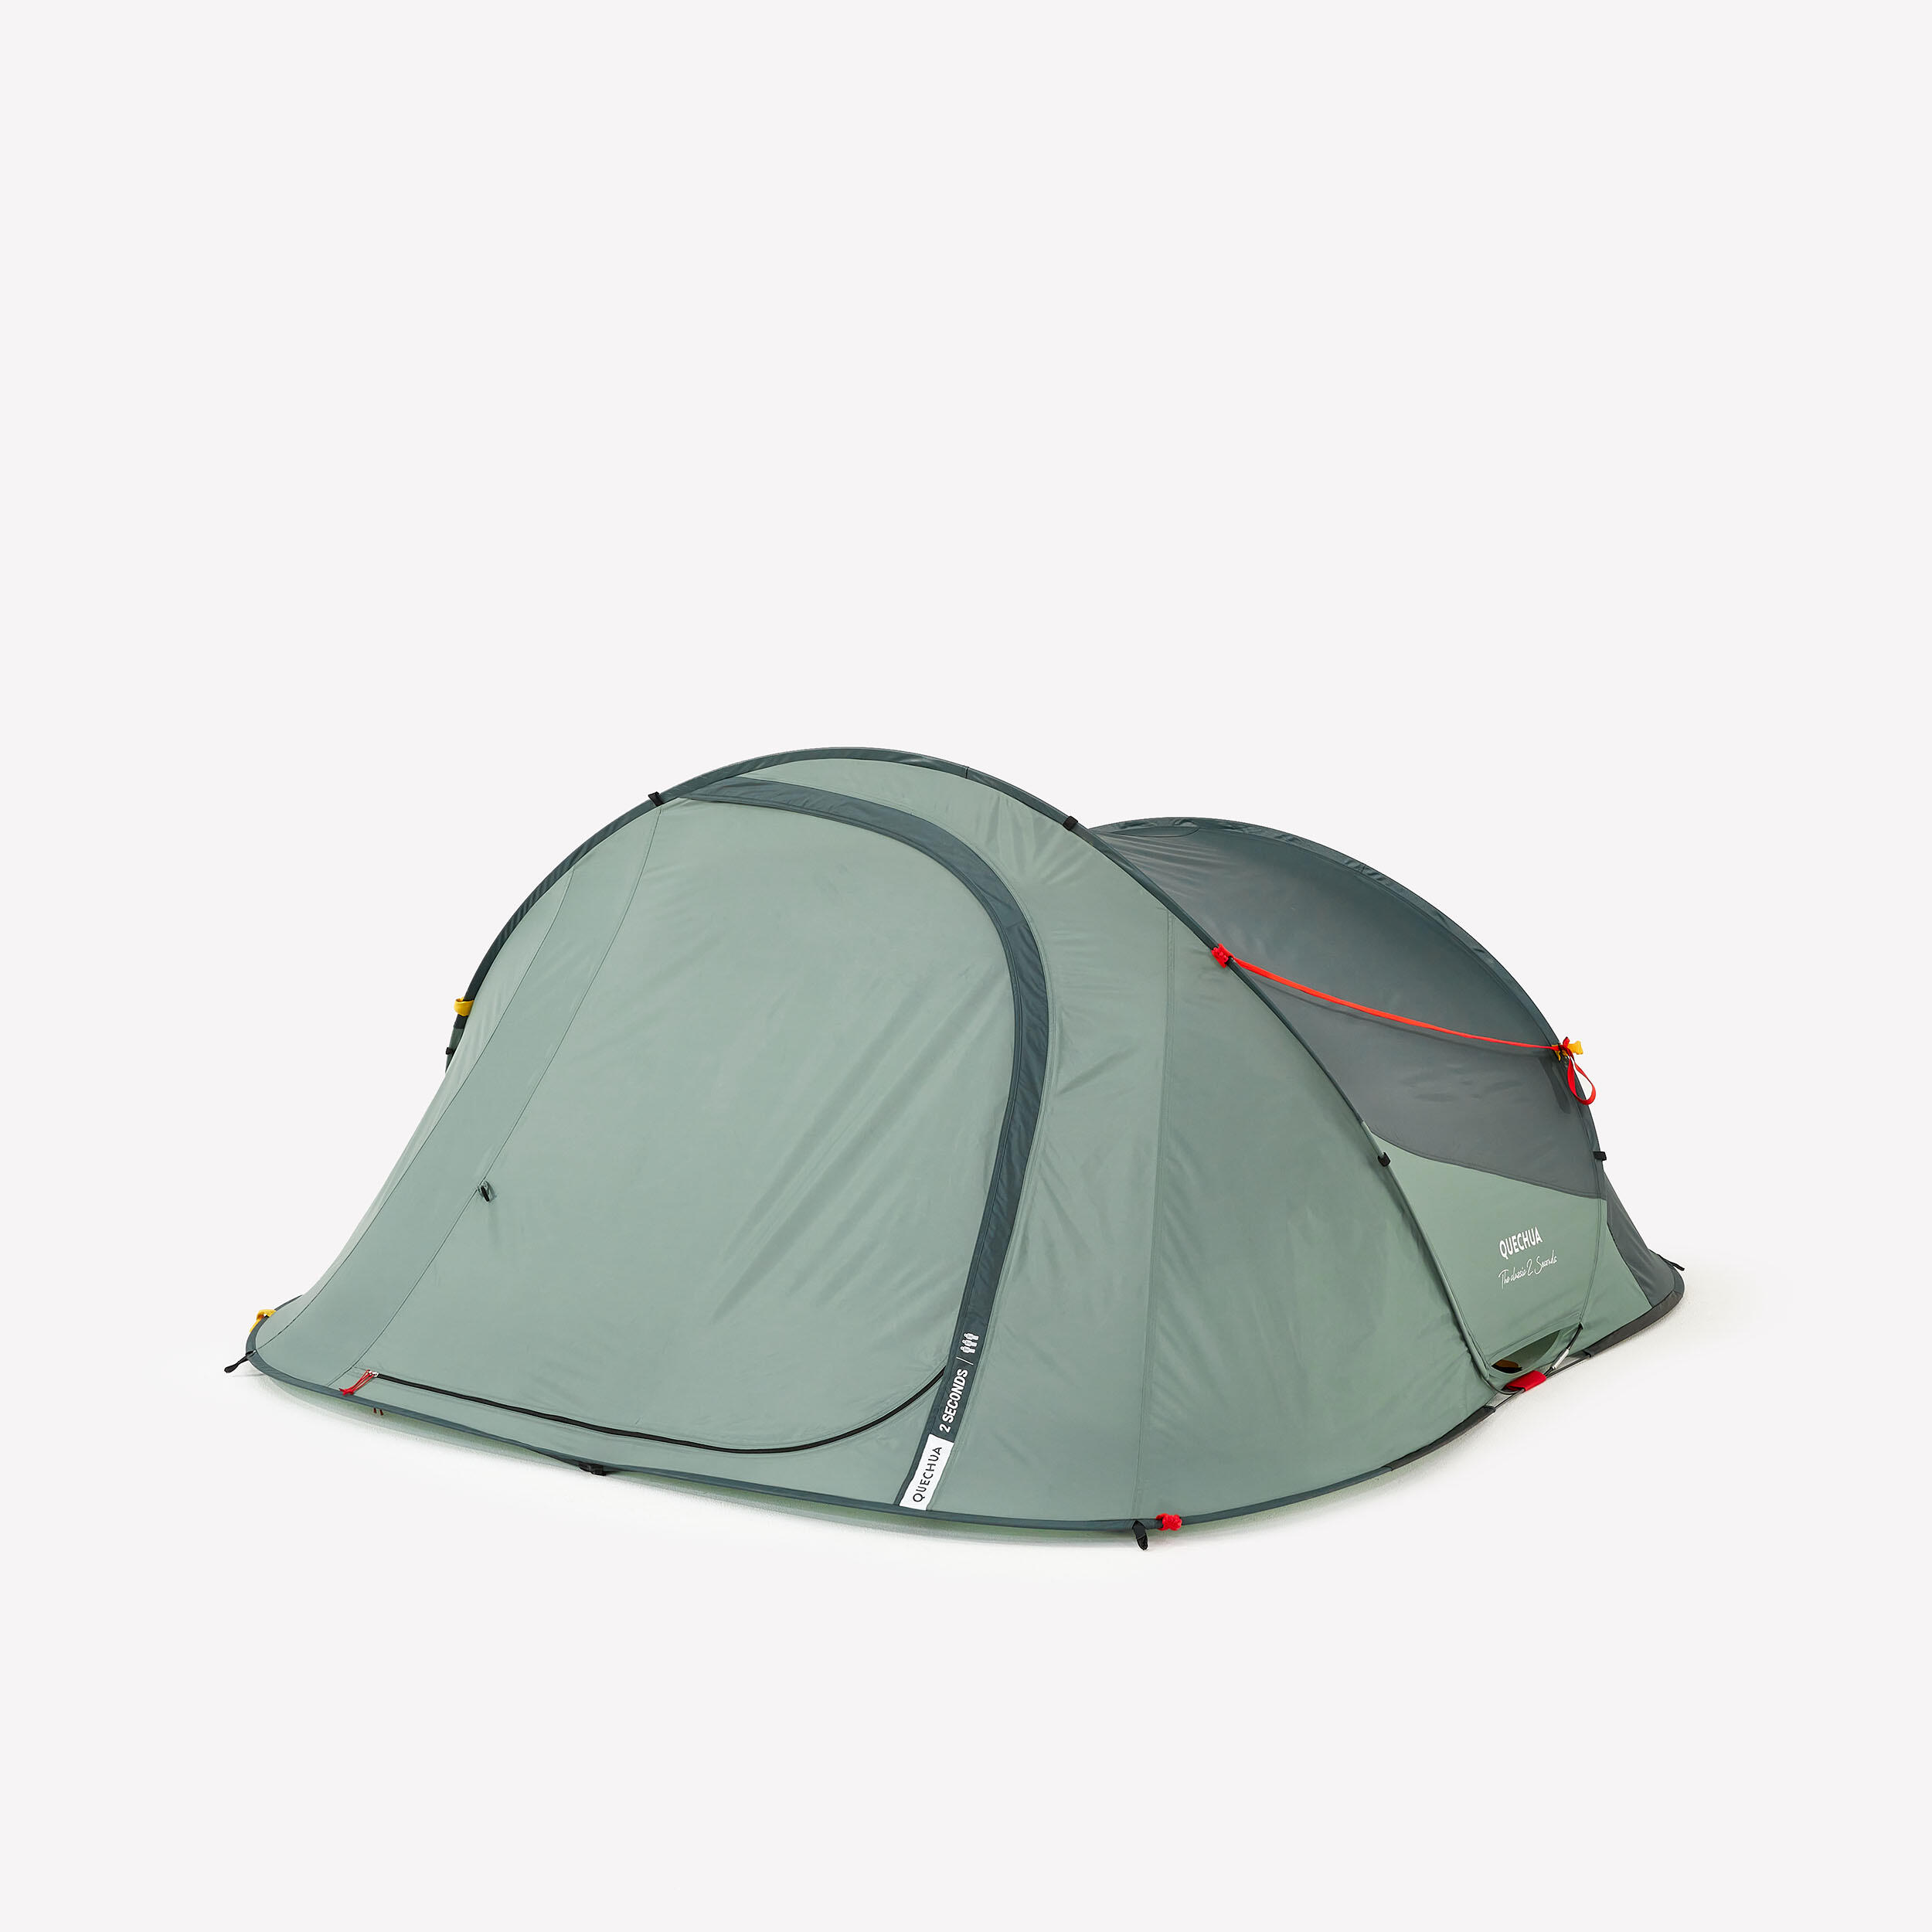 Camping tent - 2 SECONDS - 3-person 6/11